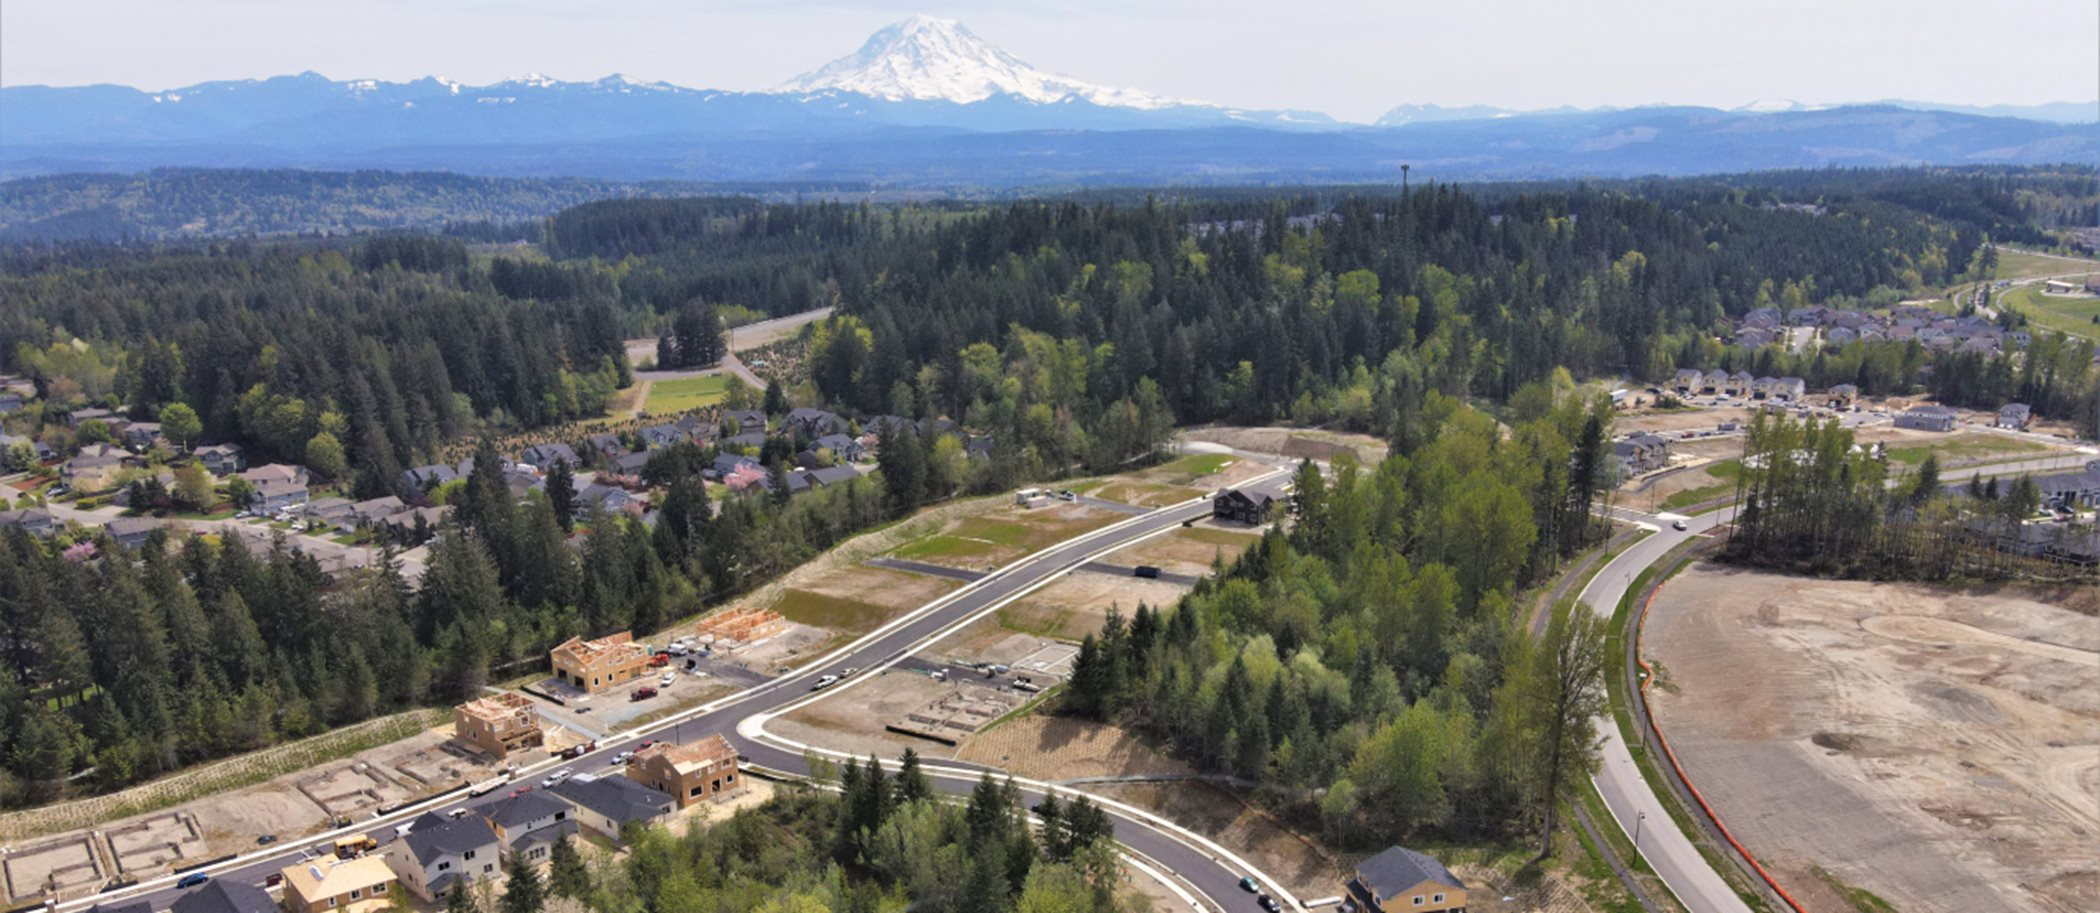 An aerial view of the community with several pine trees and homes with a snow covered mountain top in the background